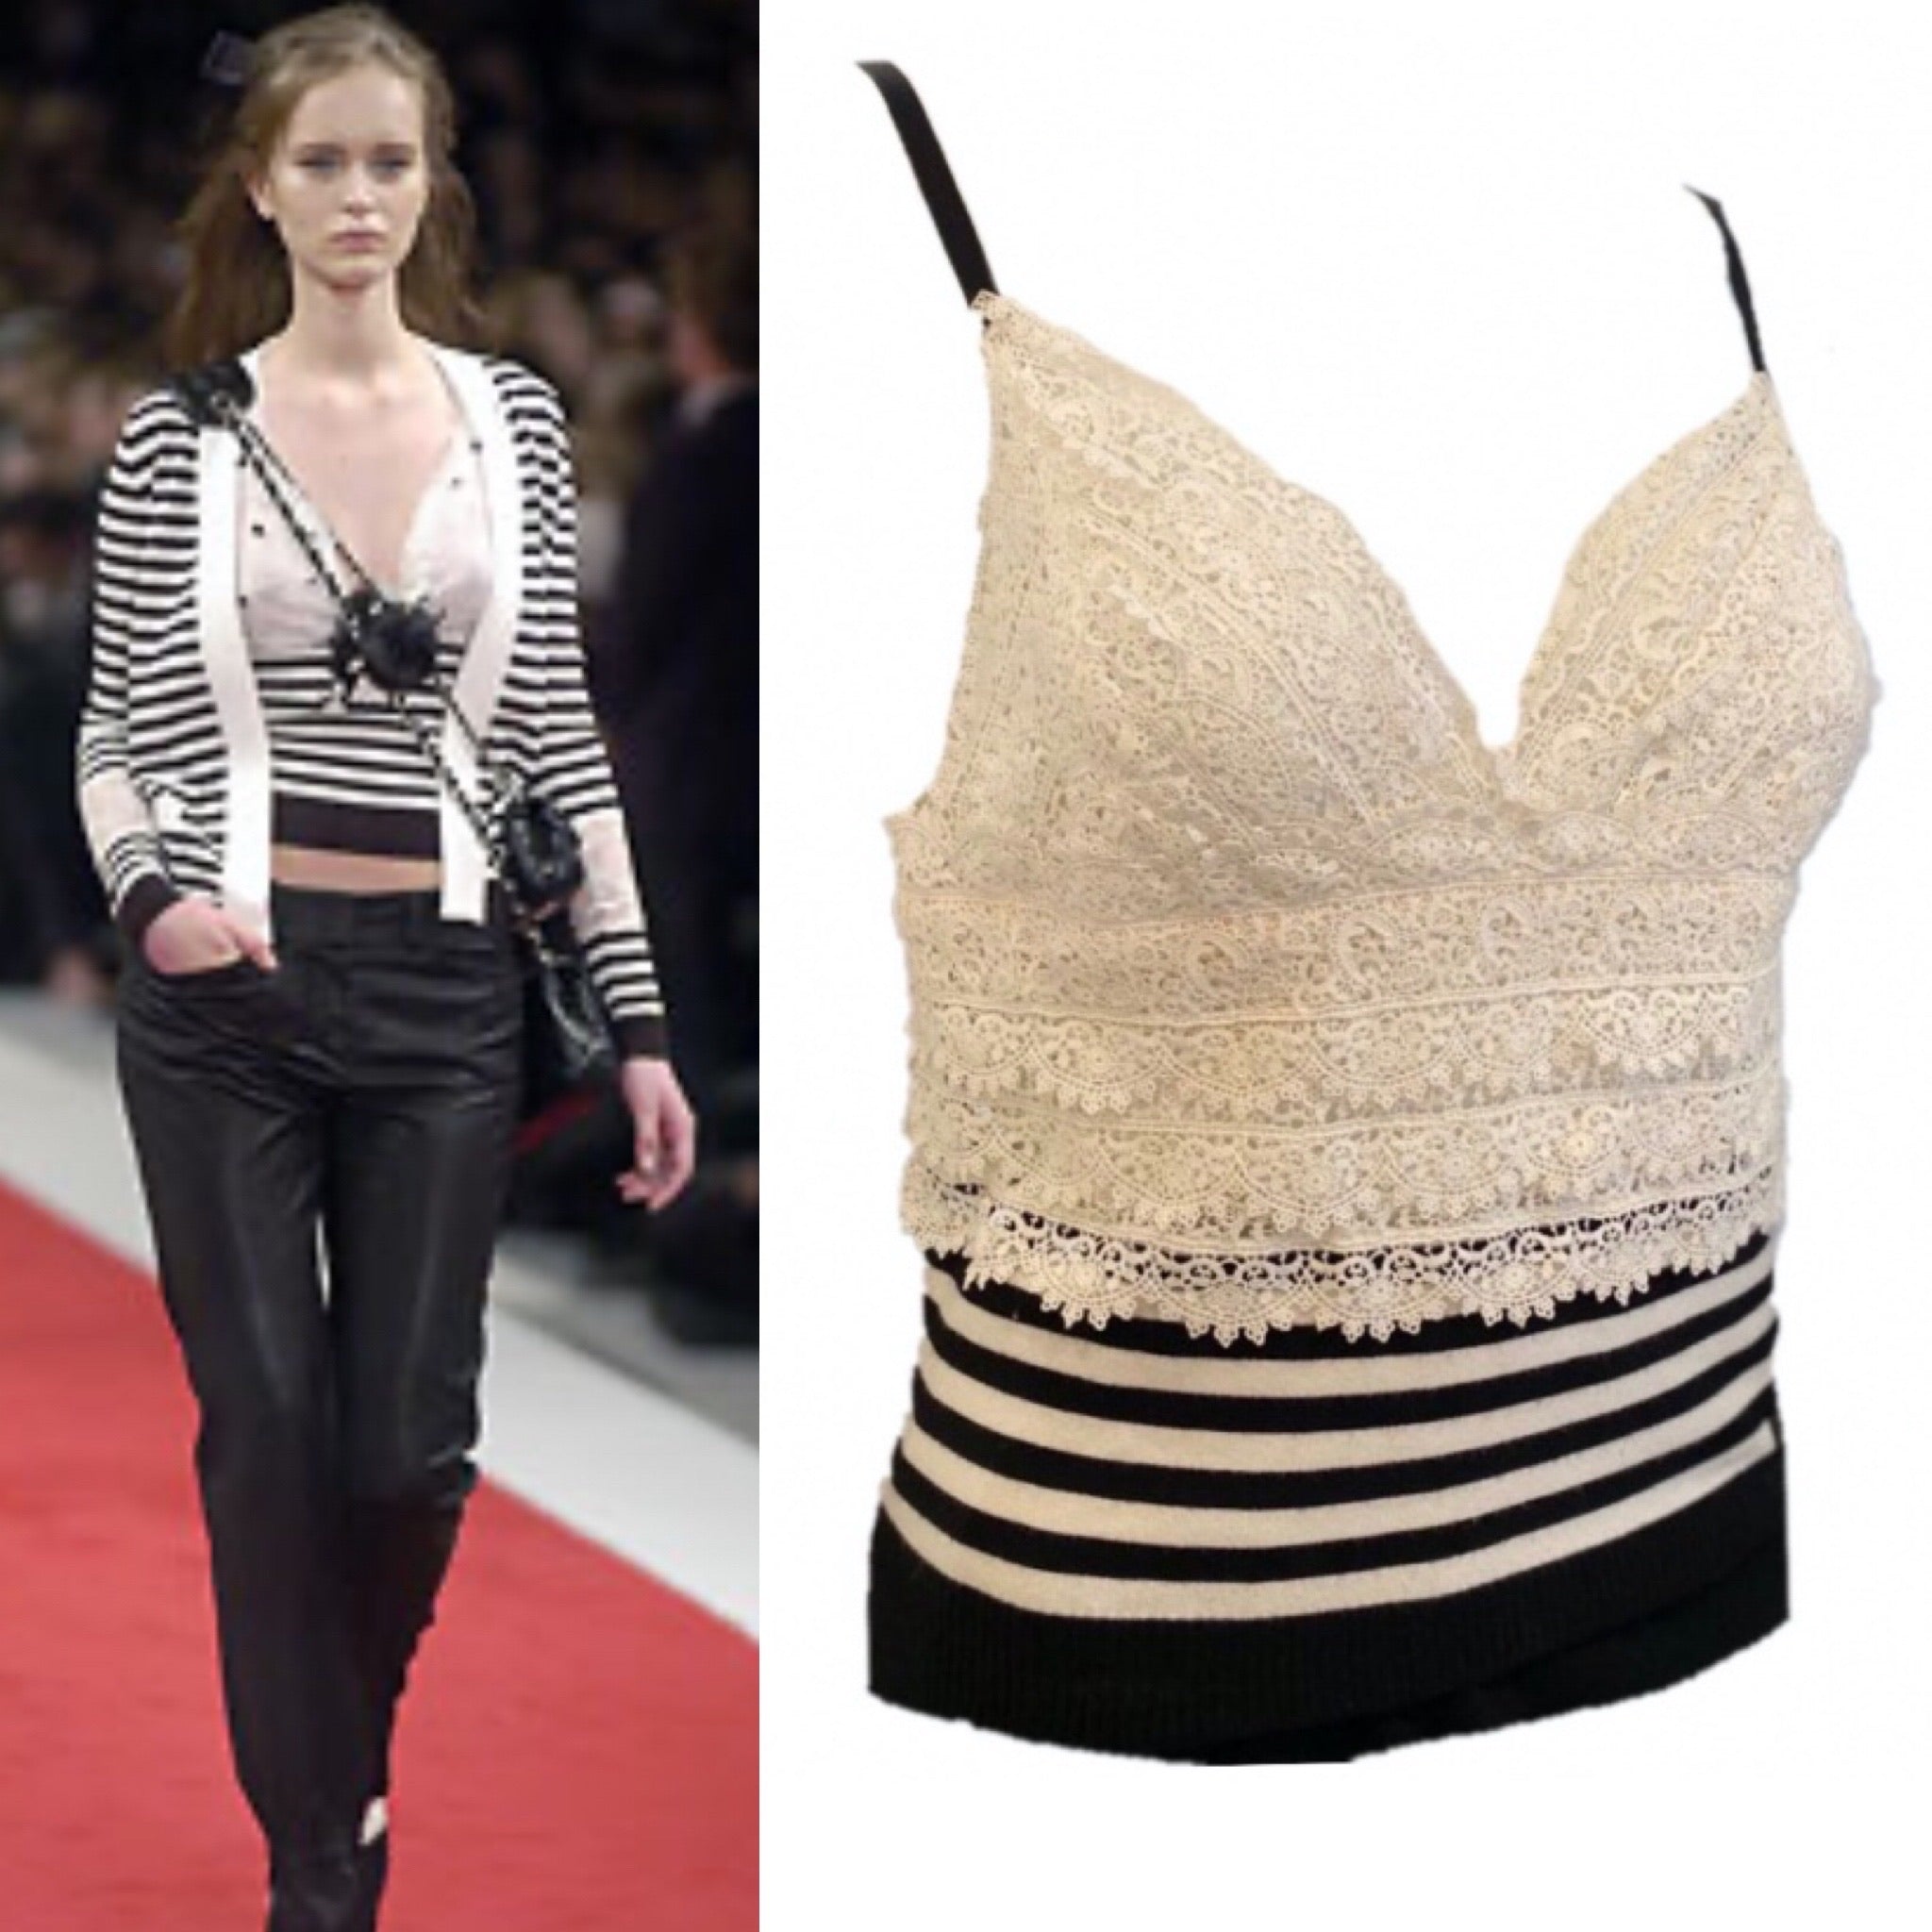 HelensChanel Chanel 05p, 2005 Spring Spaghetti Strap Camisole Lace Crochet Striped Top Blouse FR 38